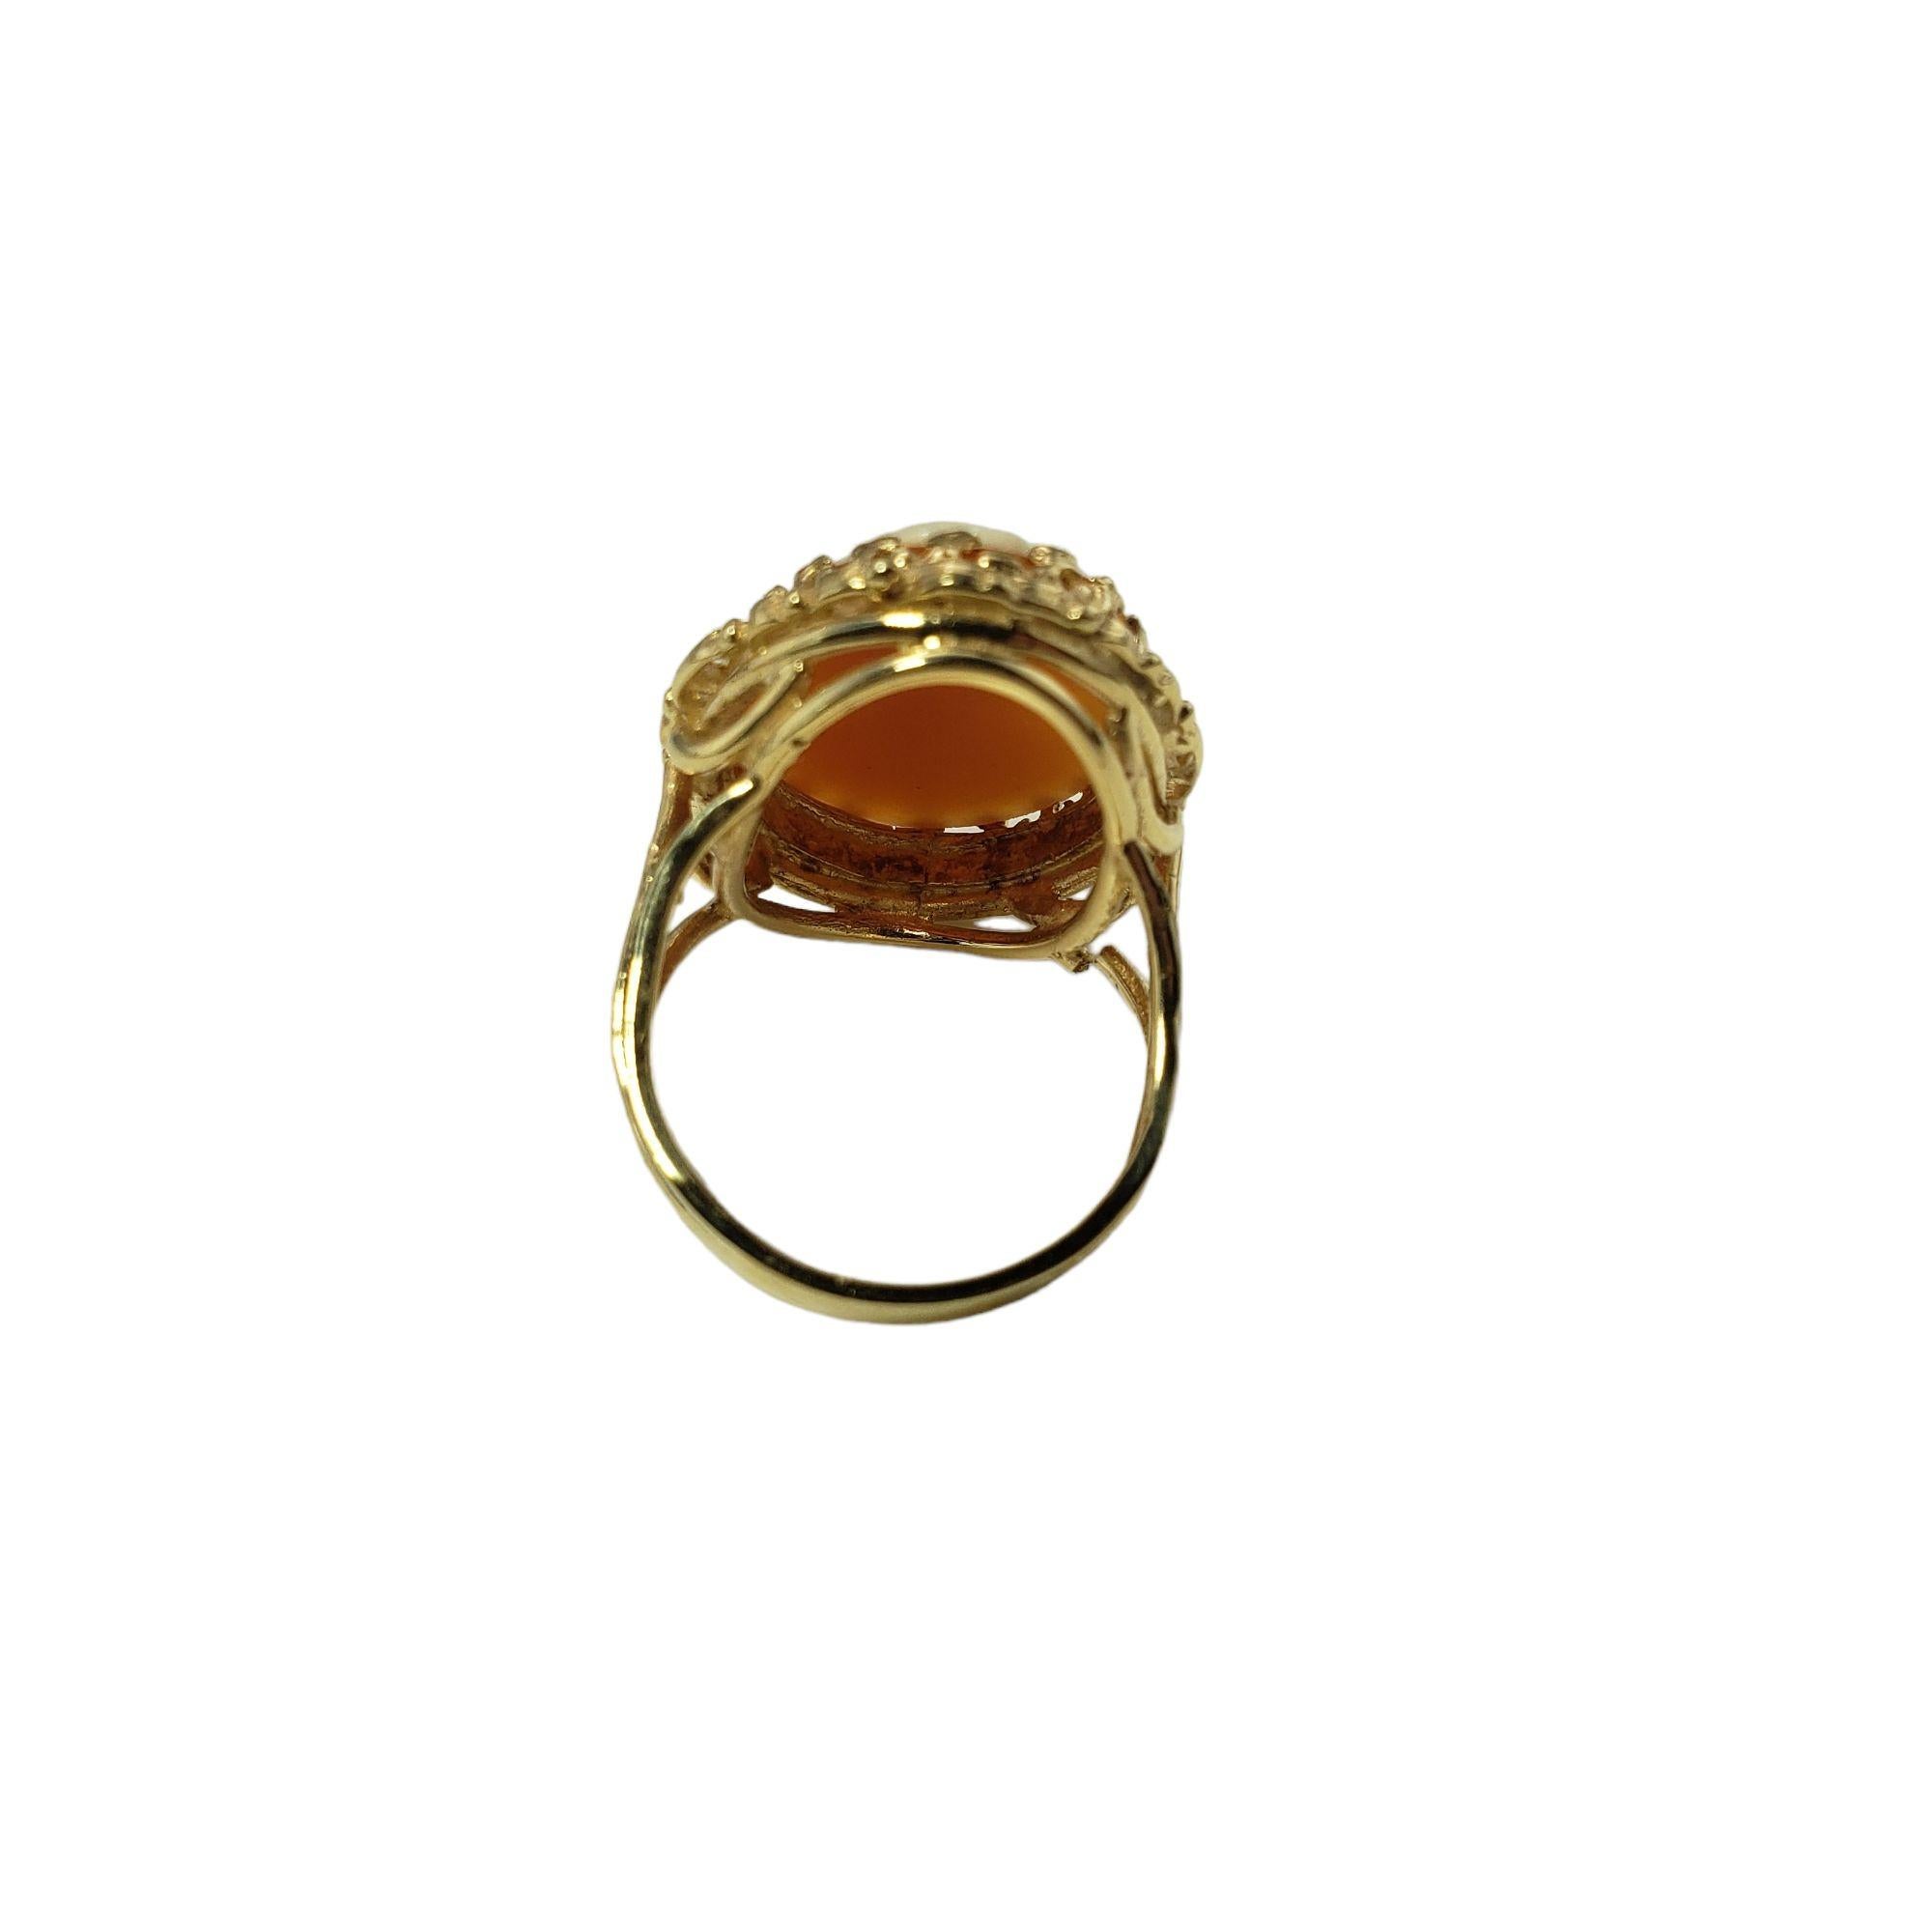 Vintage 10 Karat Yellow Gold Cameo Ring Size 7.25-

This lovely cameo ring features a lovely lady in profile set in beautifully detailed 10K yellow gold. Top of ring measures 25 mm x 20 mm. Shank measures 3 mm.

Ring Size: 7.25

Weight: 4.5 dwt. /